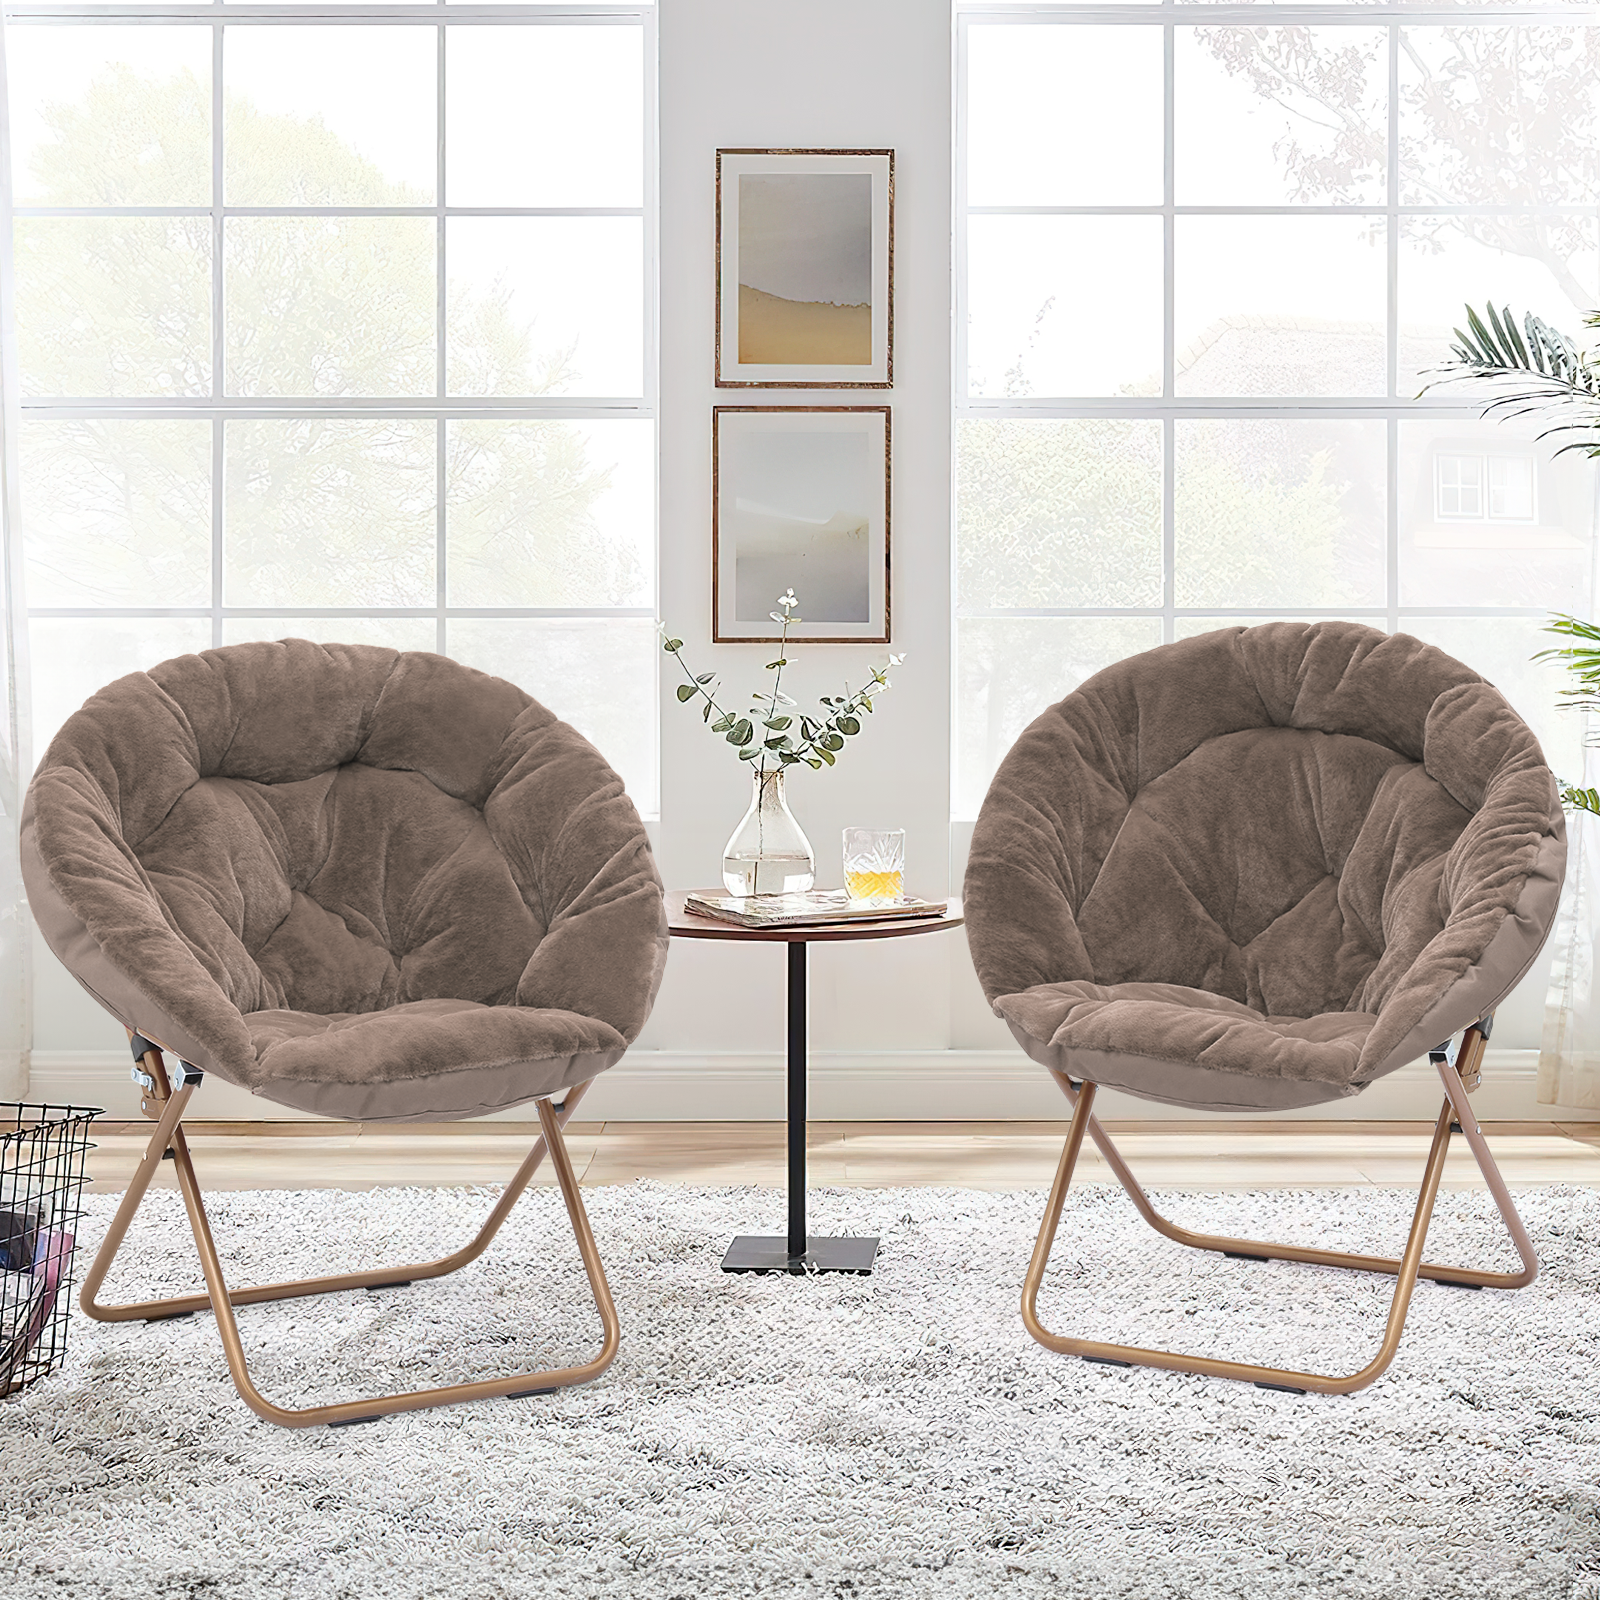 Magshion Set of 2 Comfy Saucer Chair, Foldable Faux Fur Lounge Chair for Bedroom Living Room, Cozy Moon Chair with Metal Frame for Adults, X-Large, Beige - image 3 of 10